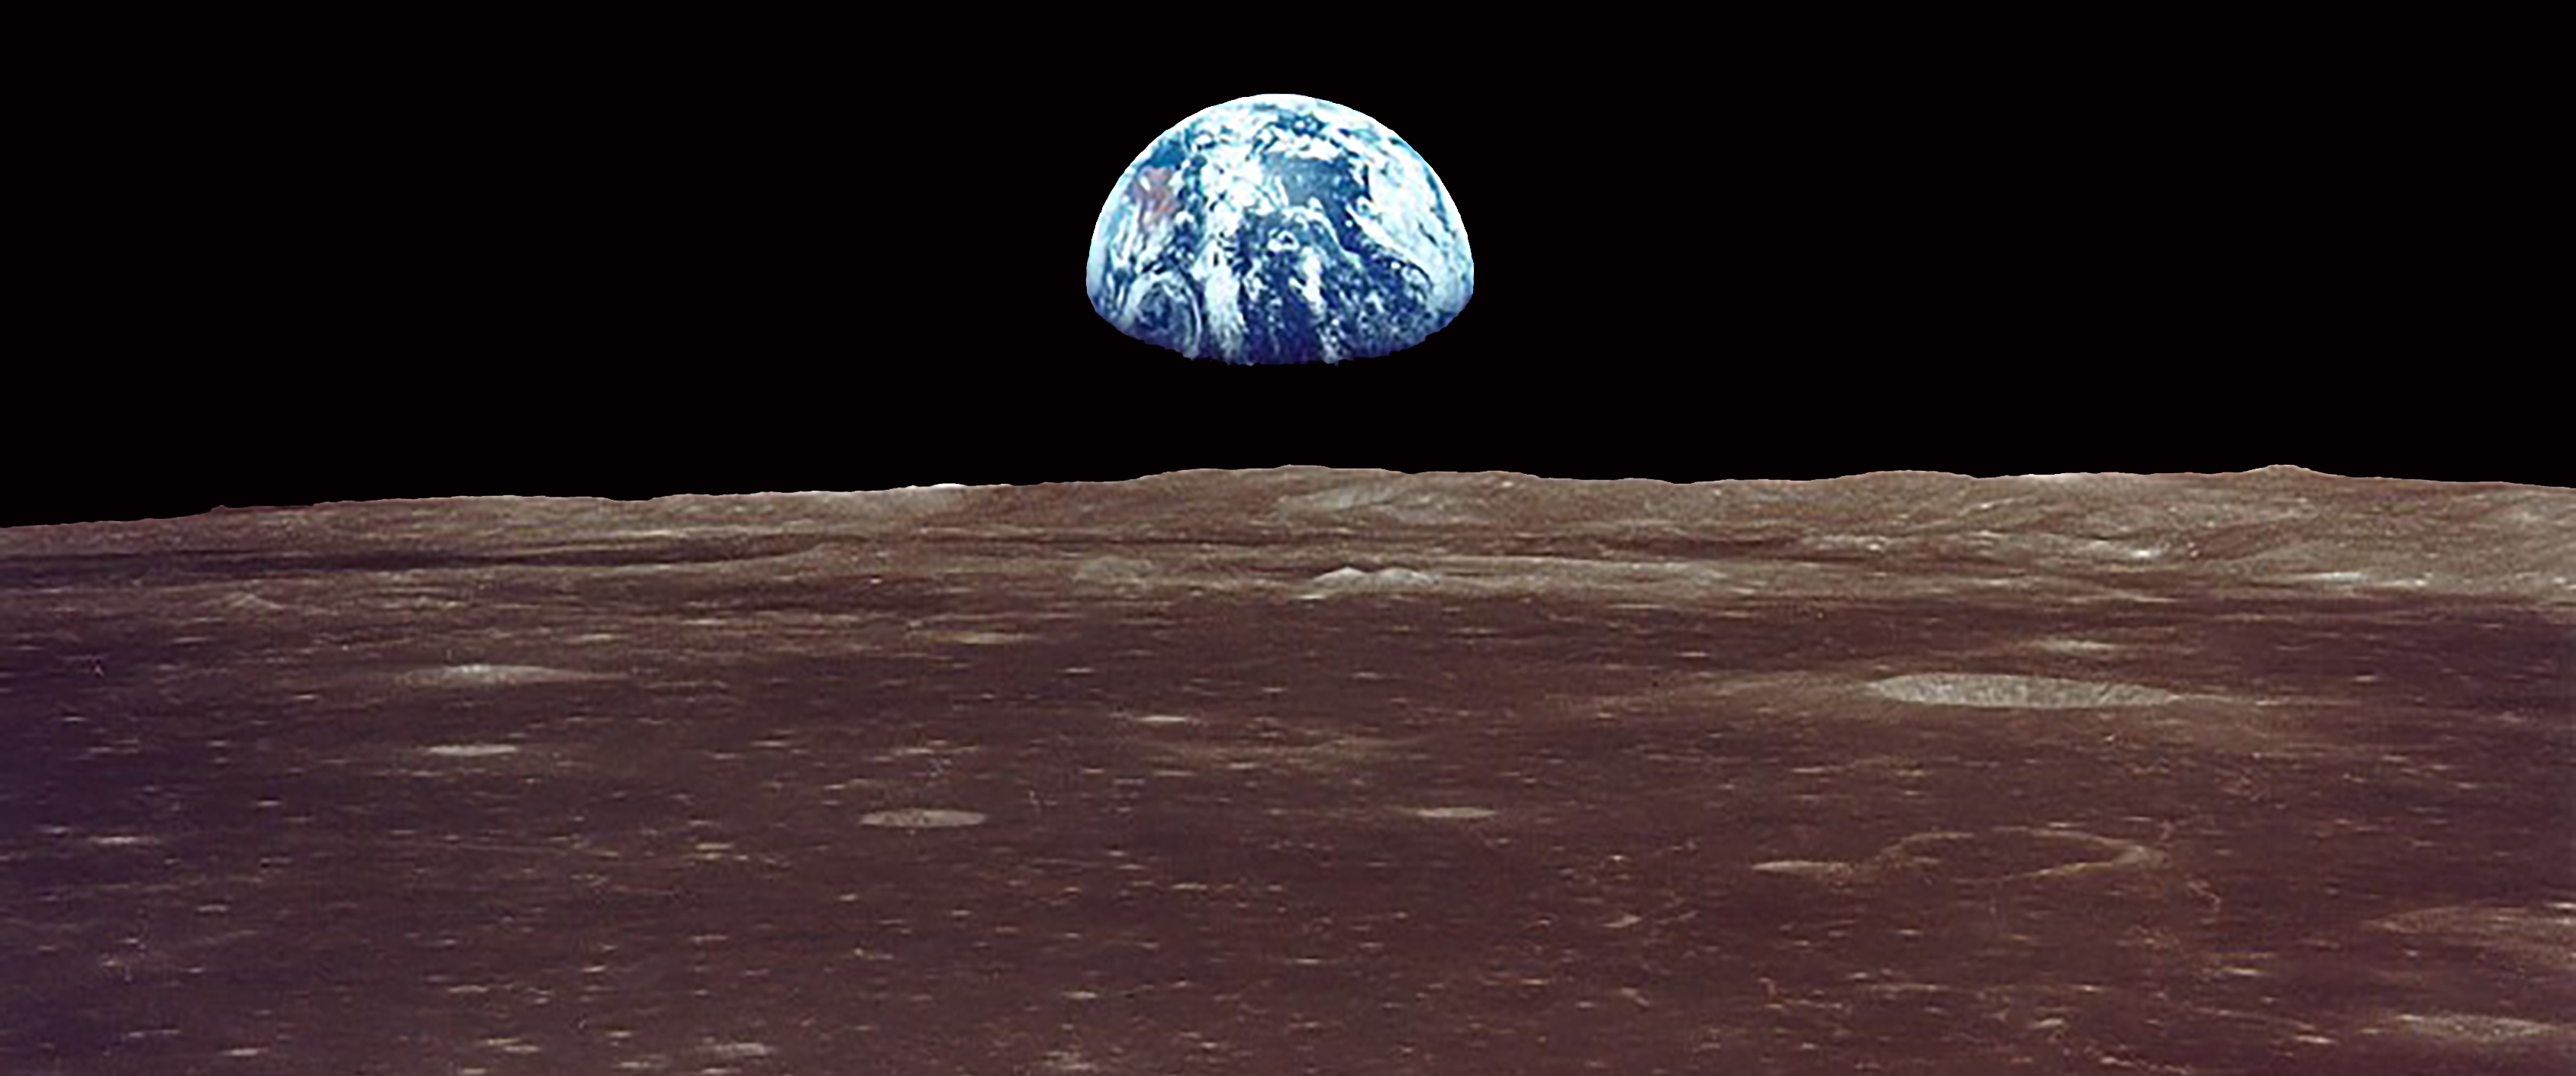 The earth rises over the surface of the moon.